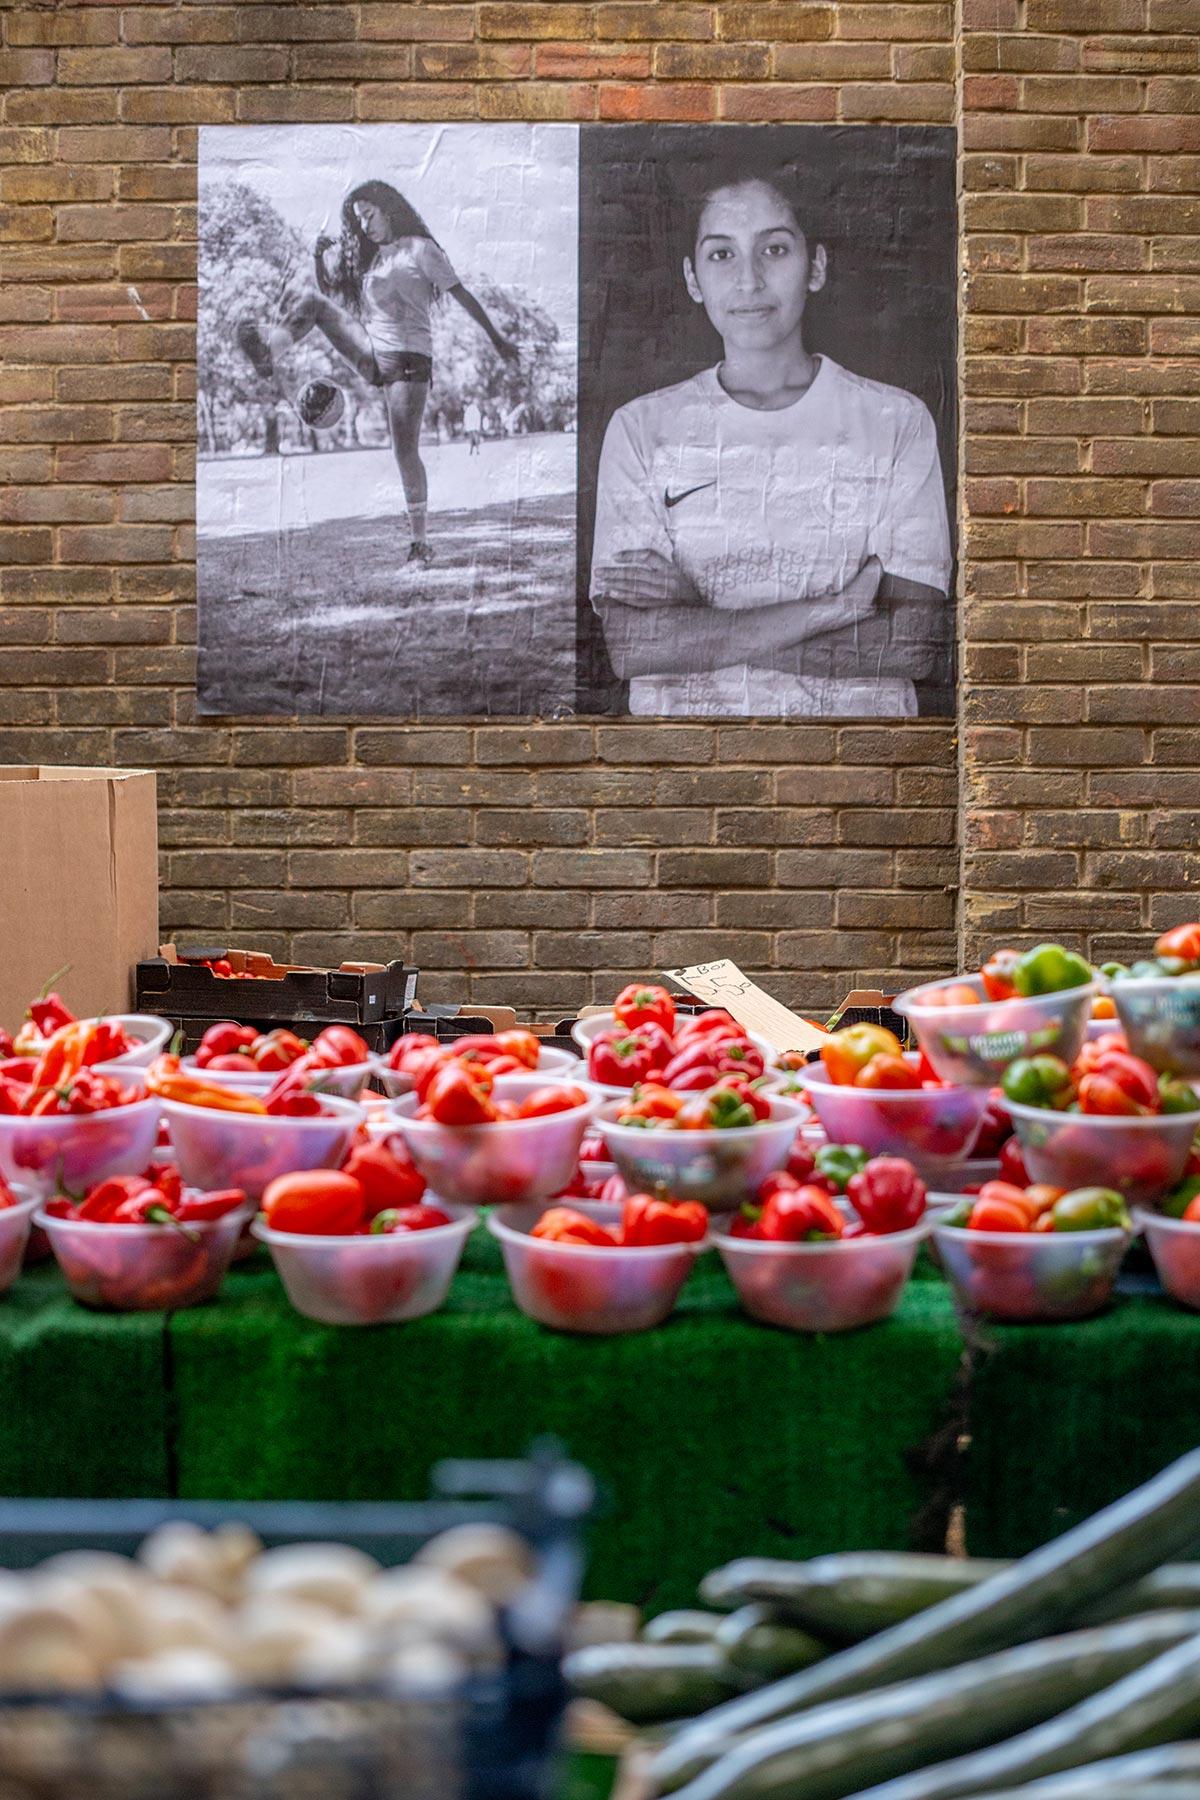 Photograph of Green Street Market with fruit and vegetables in bowls